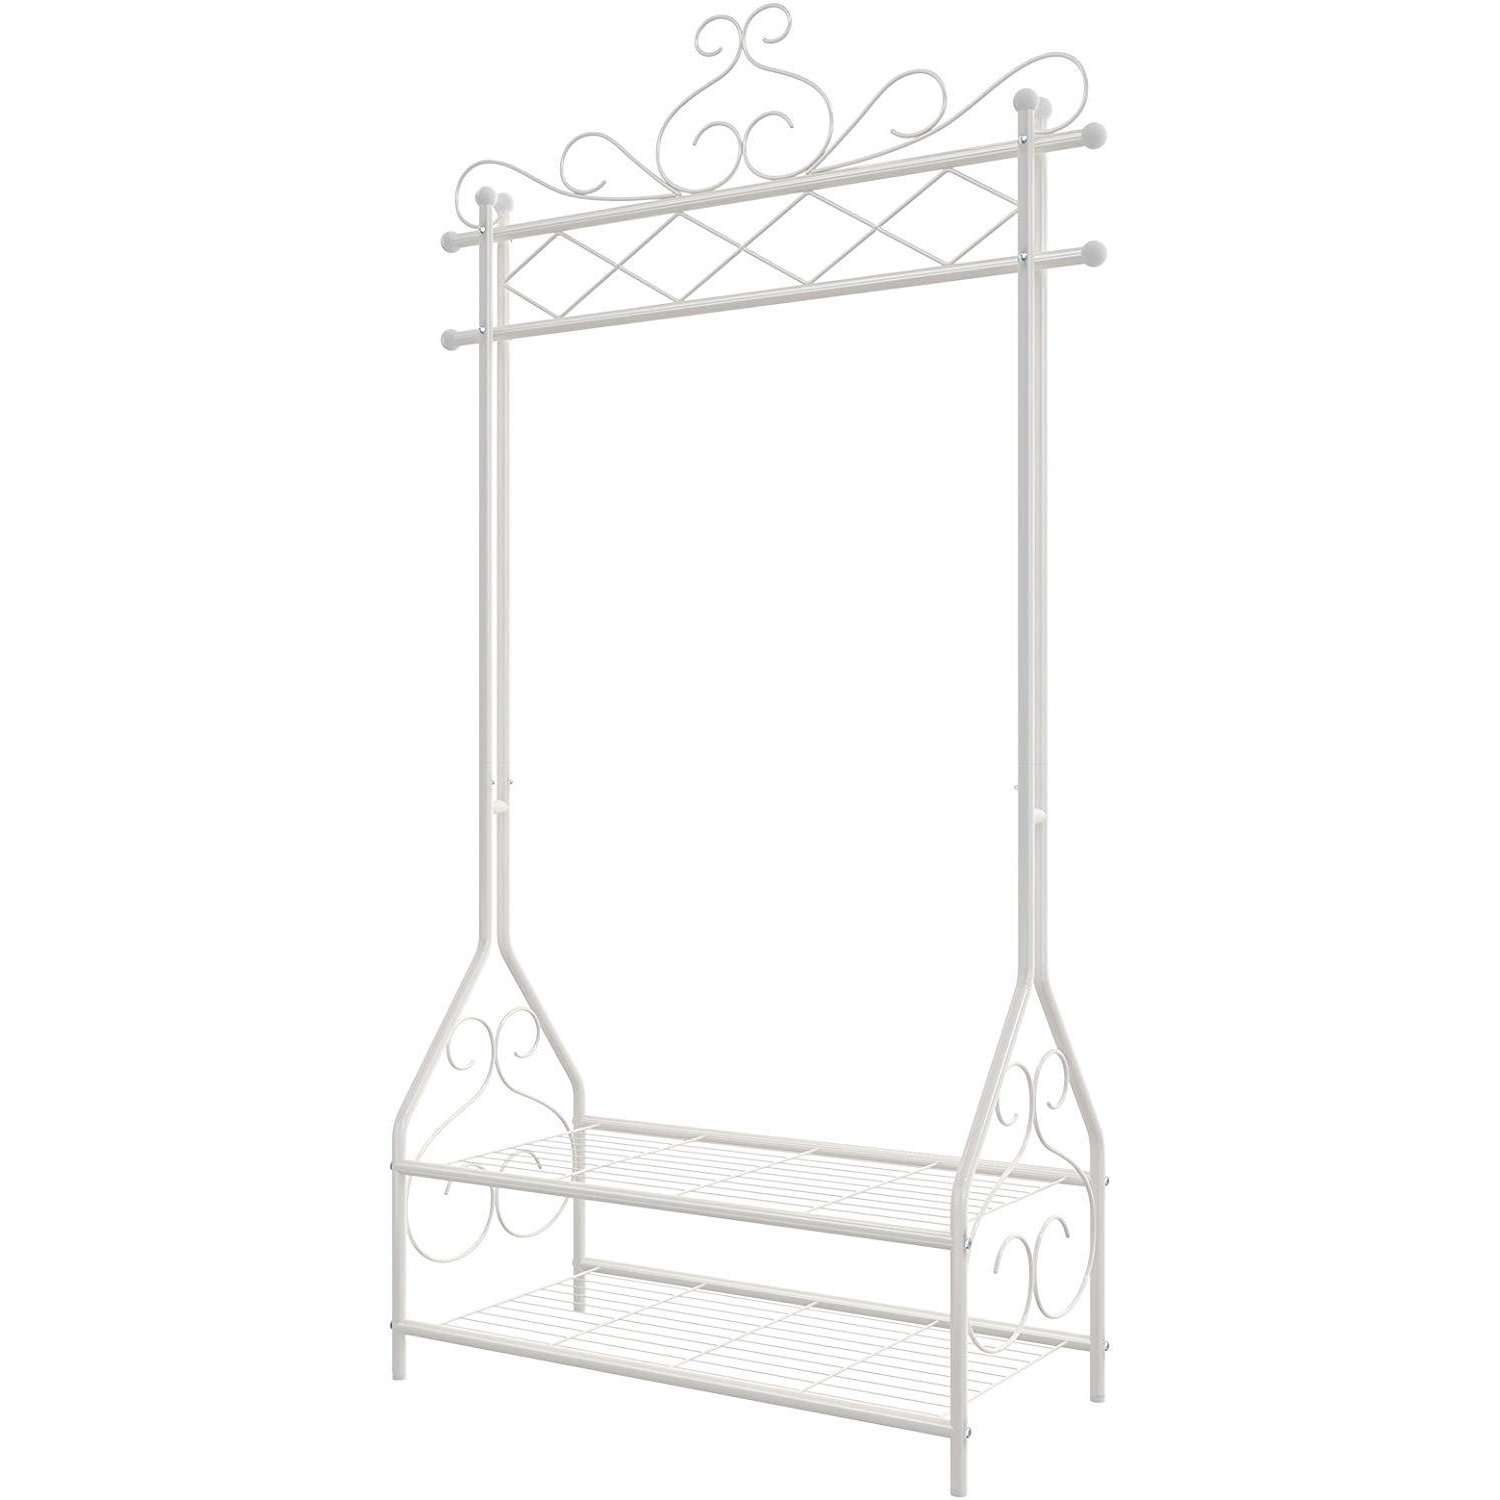 Nancy's Vintage Clothes Rack - Clothing Racks - Rack with Clothes Rail and 2 Shelves